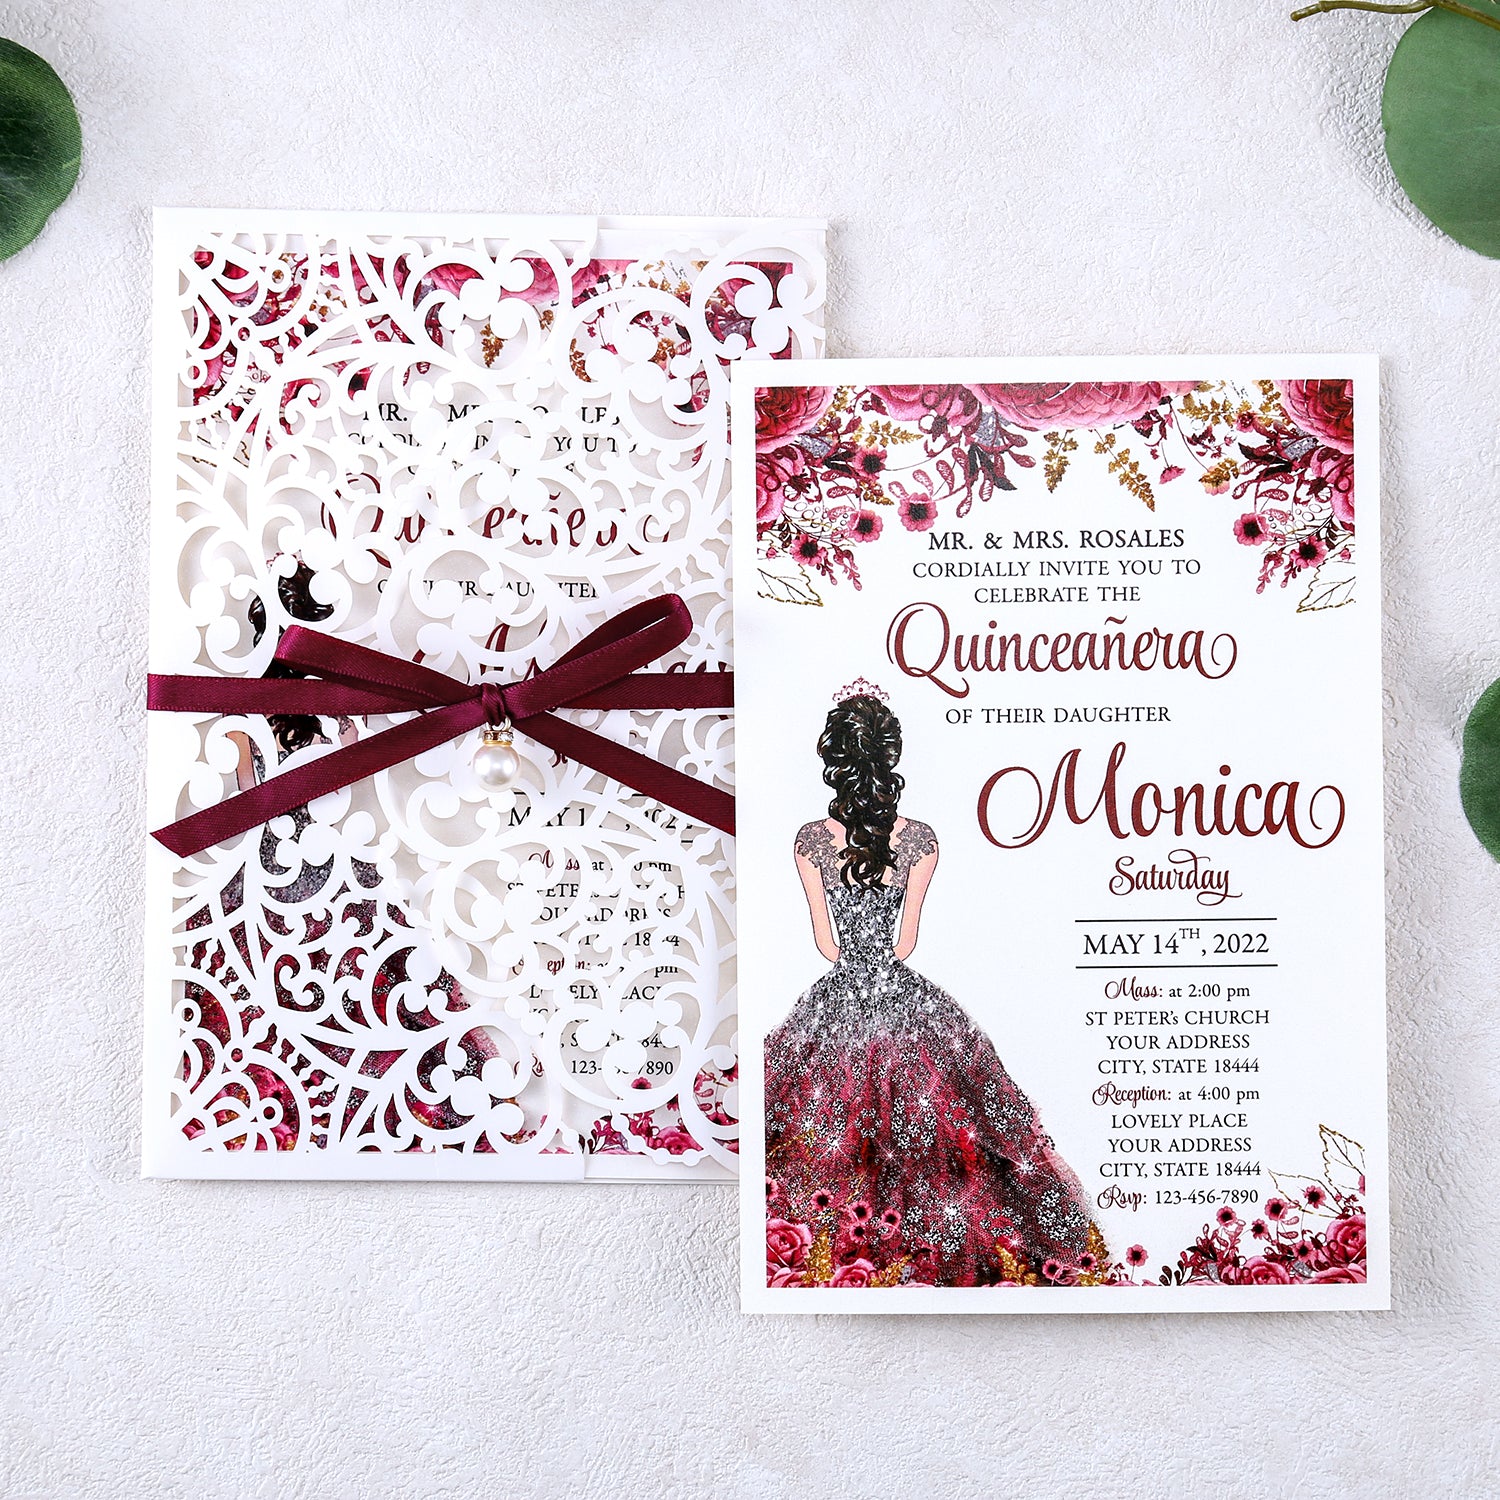 Doris Home 50pcs Laser Cut Quinceanera Invitations Red 47x71 Personalized Quince Invitations for 15th Birthday Invitation Cards for Sweet 16 with ENVE